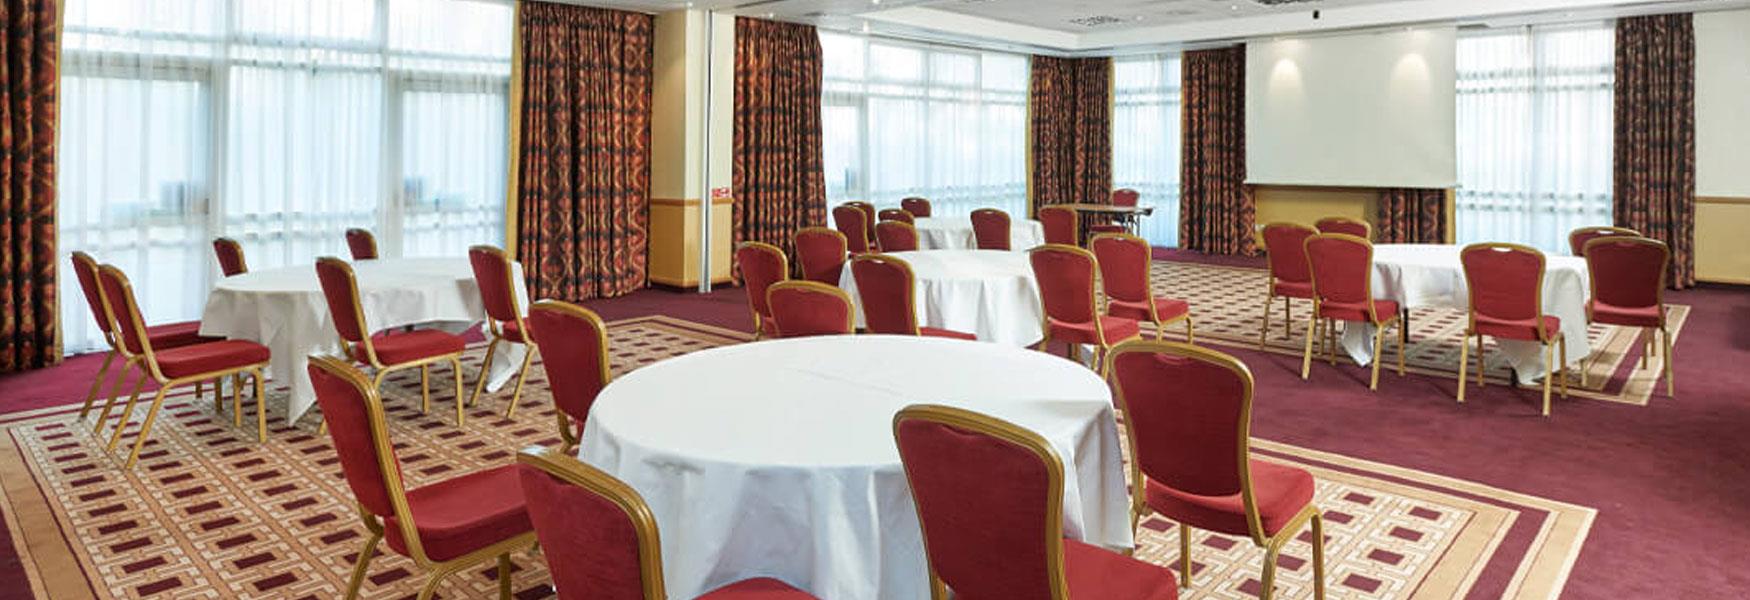 Conference Room at ORIDA Hotel Maidstone